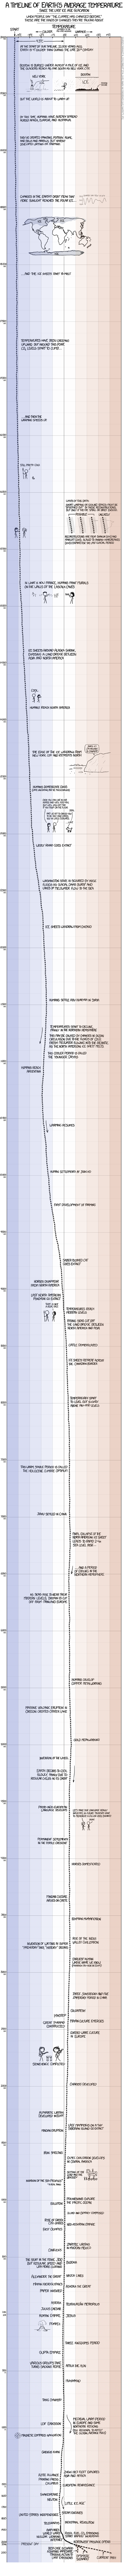 imgs.xkcd.com_comics_earth_temperature_timeline.png